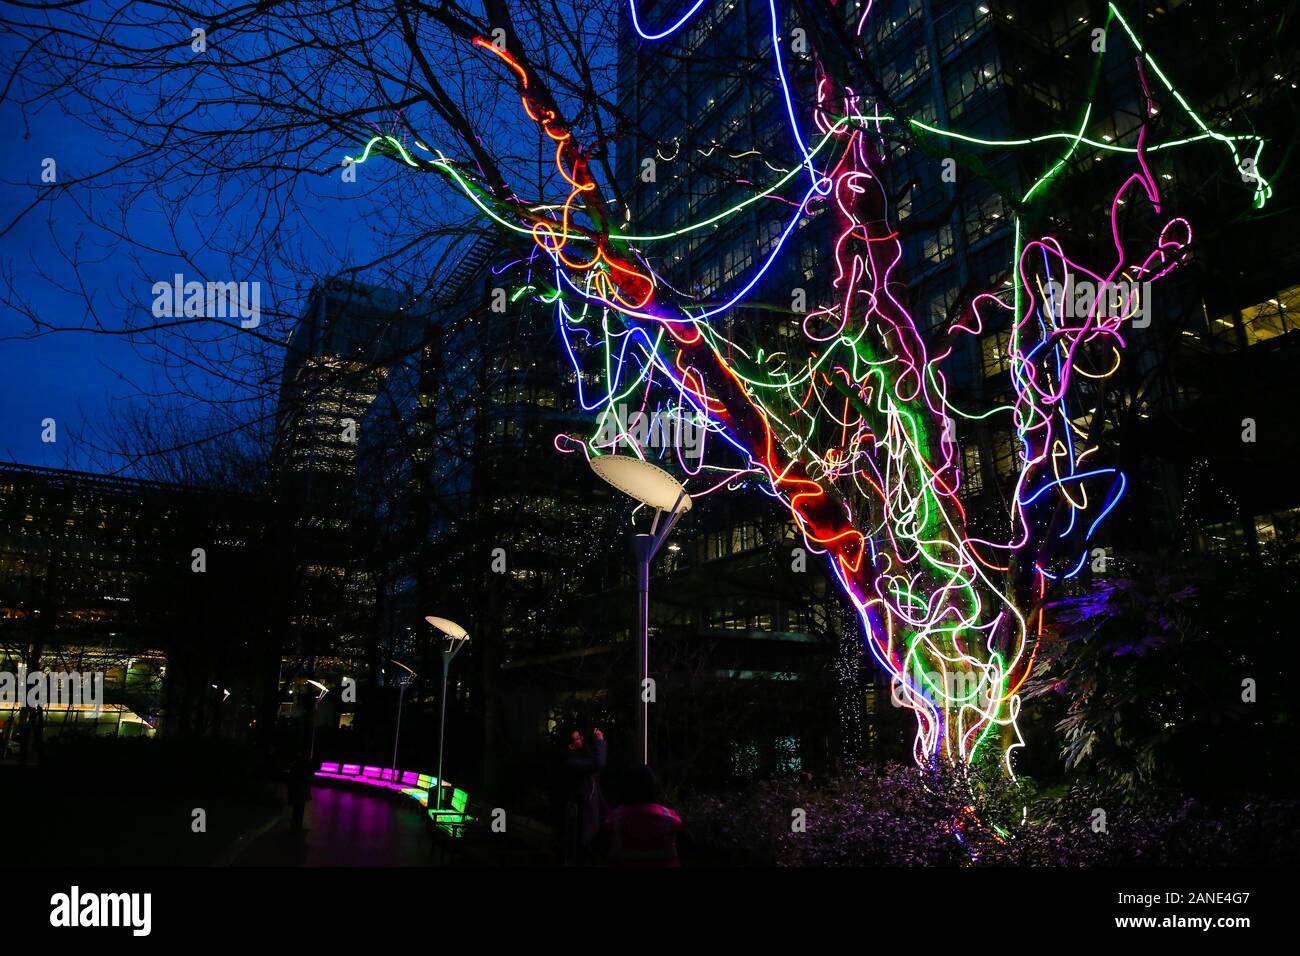 Neon Tree art installation is seen during the opening day of the Canary Wharf Winter Light Festival in Docklands, London. The festival is open to public daily from 4pm to 10pm until 25 January 2020. Neon flex transforms a tree into a striking sculpture Canada Square Park. This colourful display shines subtly by day and dazzle by night. Stock Photo